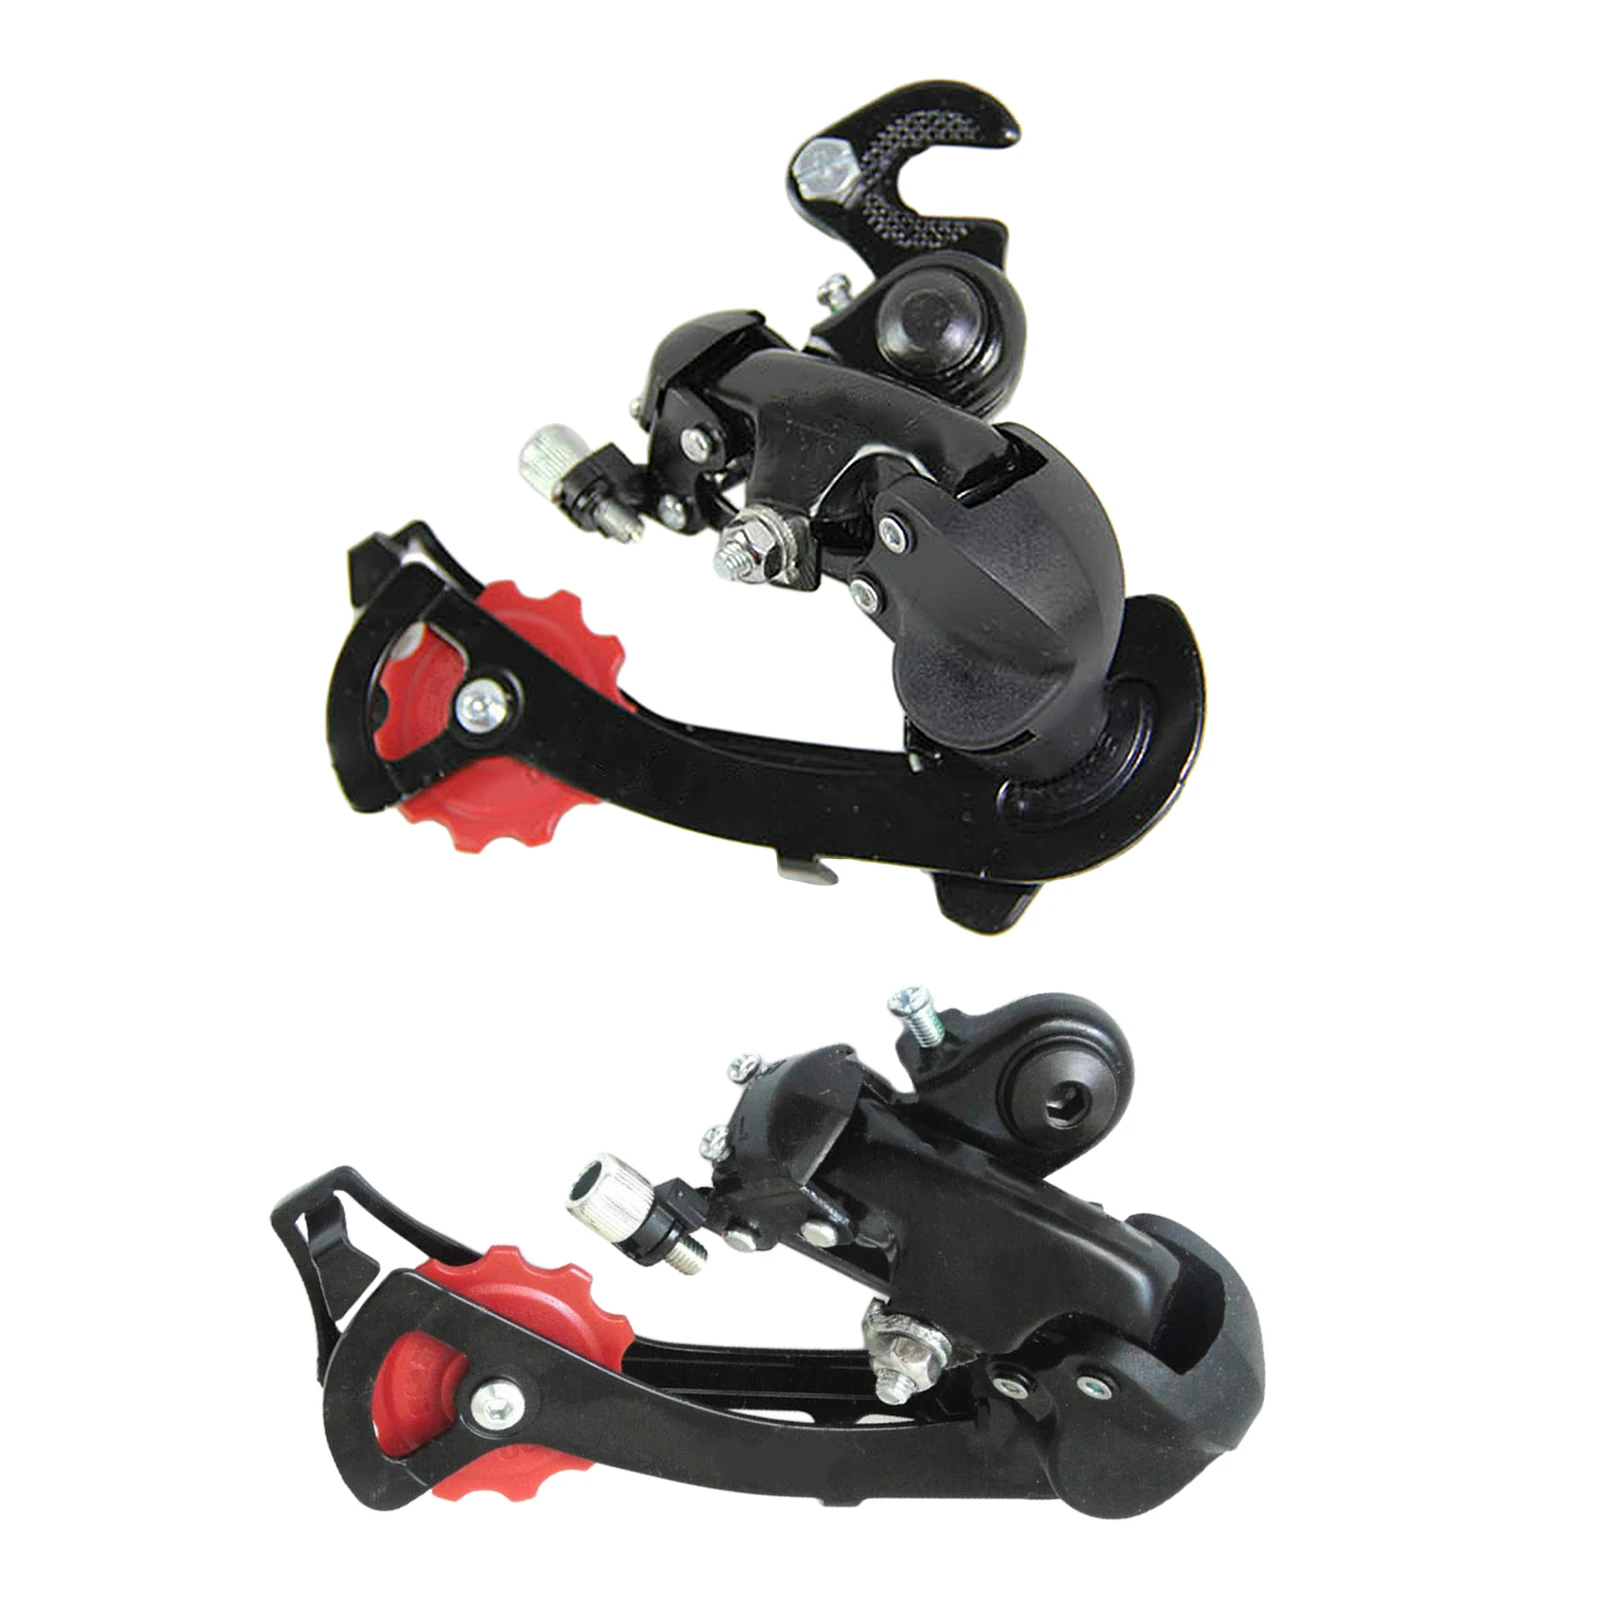 Bike Rear Derailleur RD-TZ50 6/7 Speed Sis Index Direct Mount for Mountain Bicycle, Eye Pull/ Hook Pull